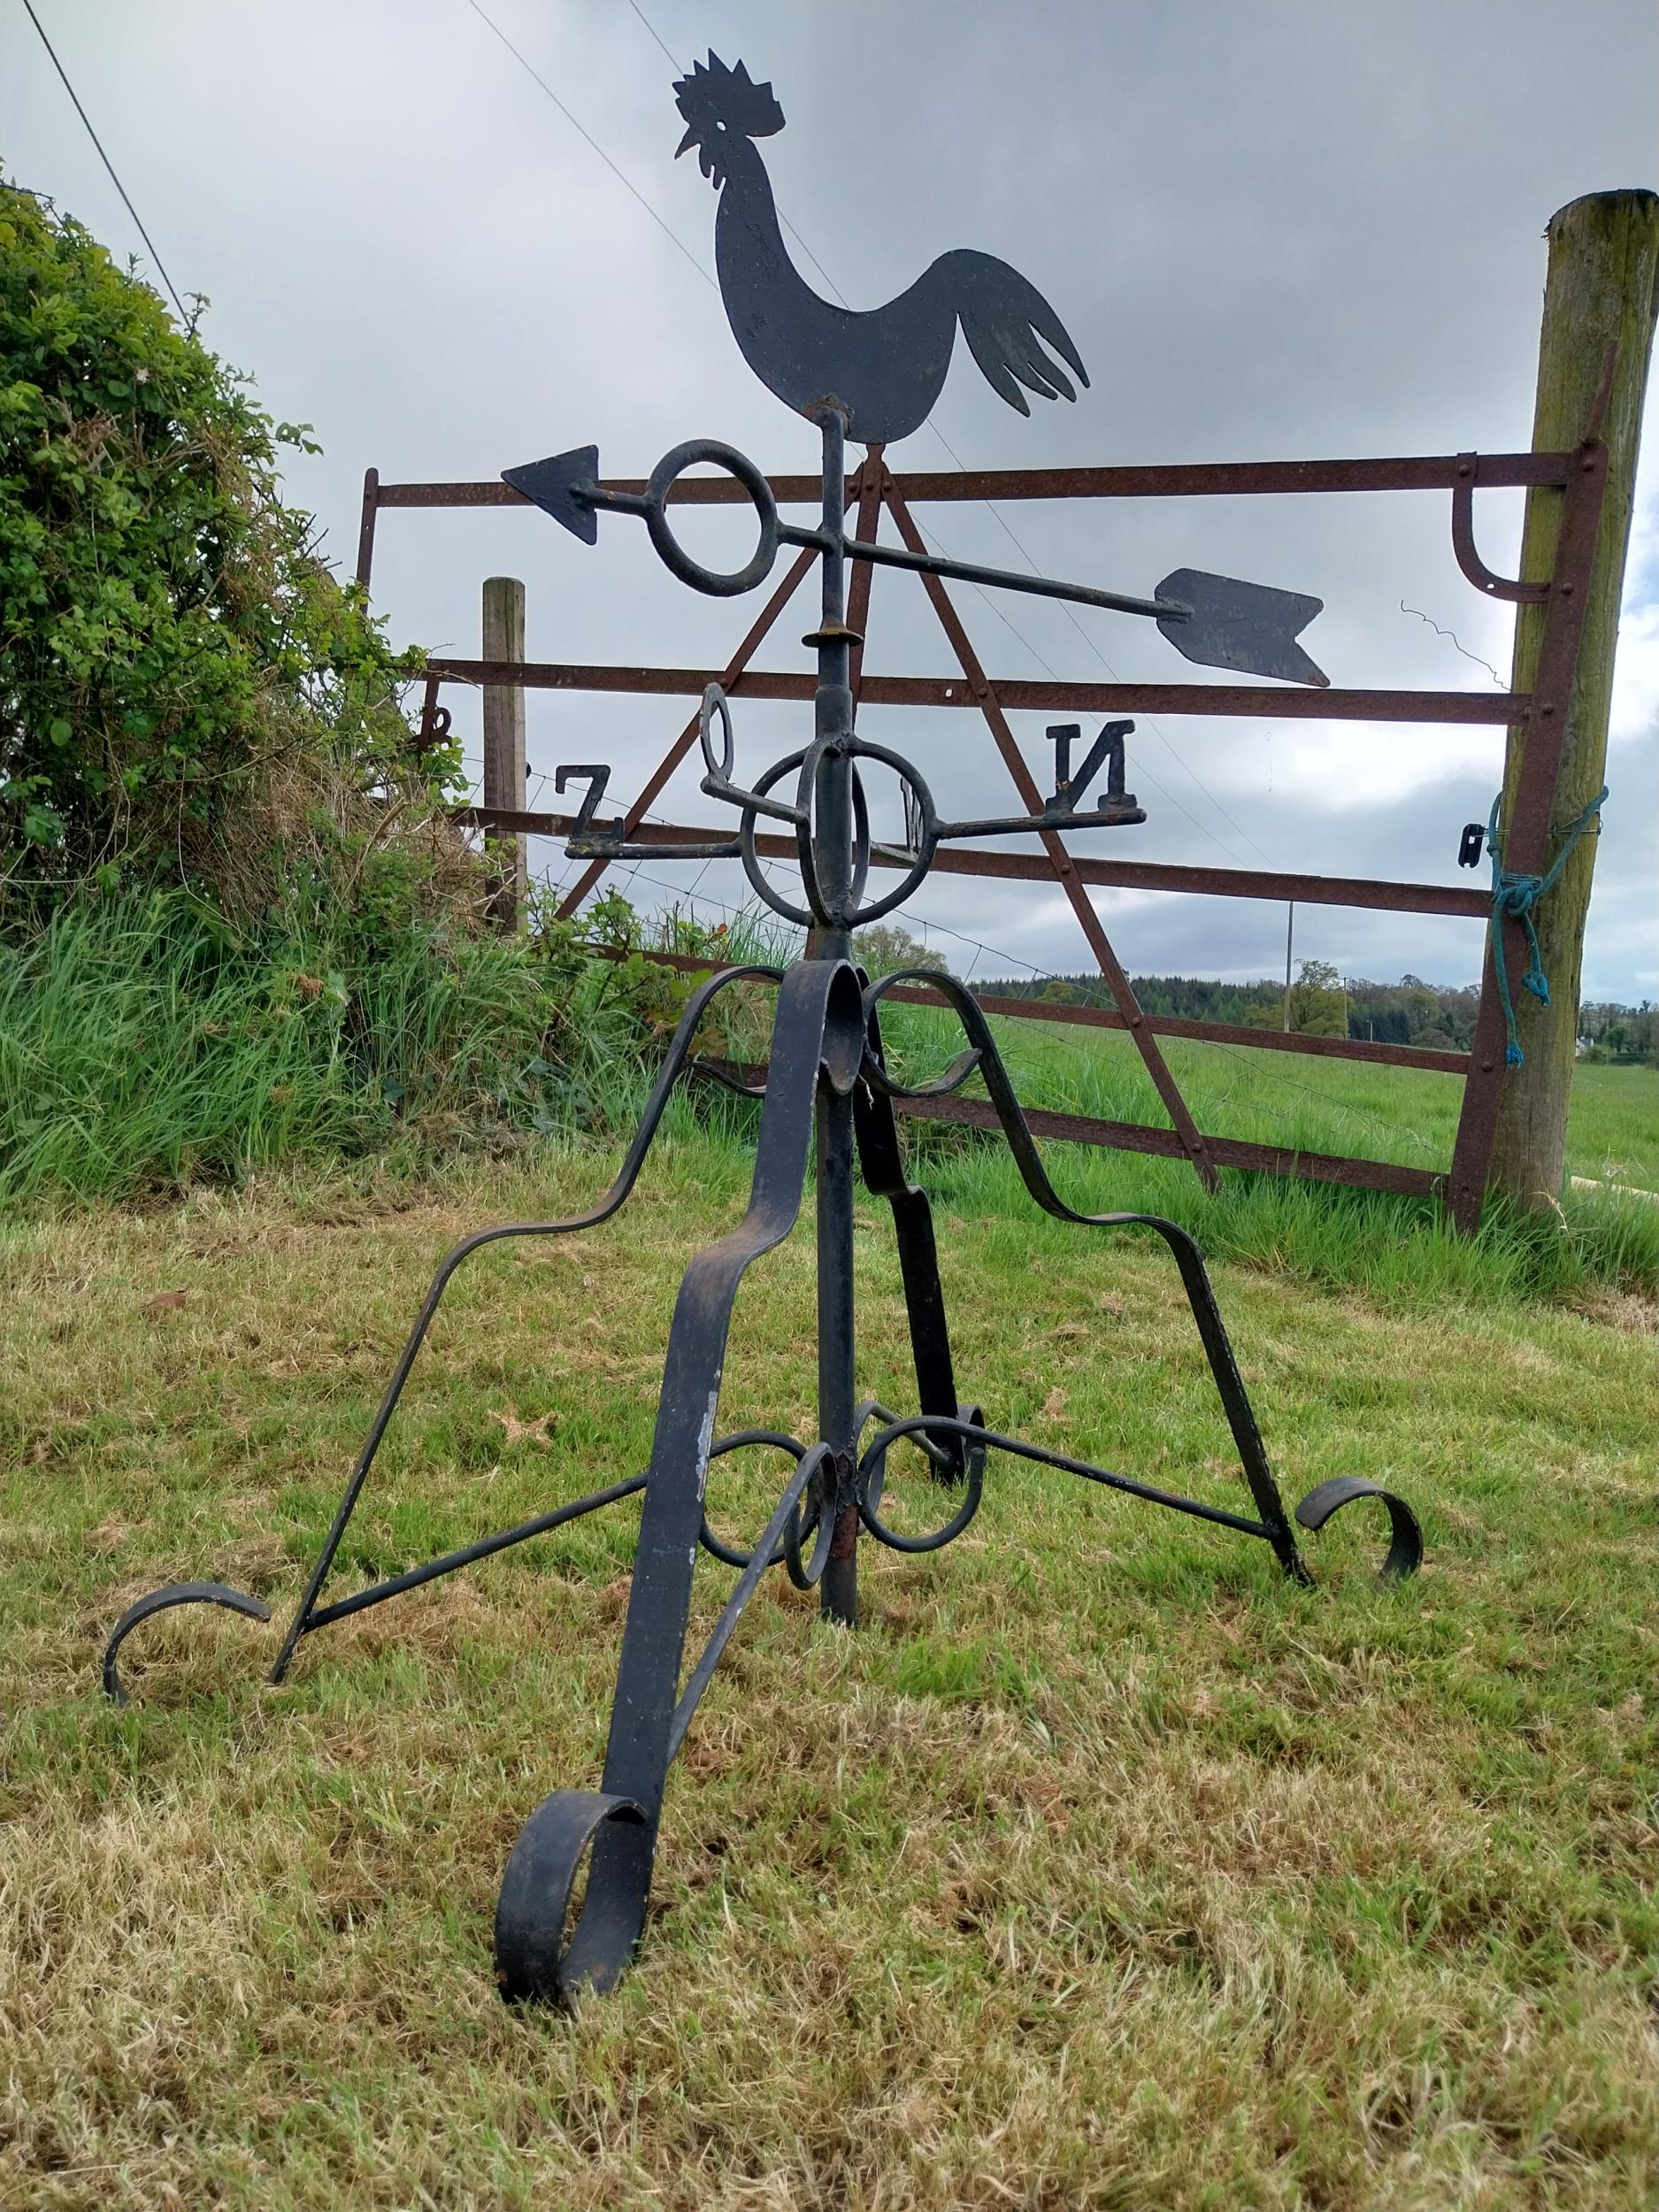 Wrought iron weather vain Rooster {117 cm H x 116 cm W x 99 cm D}. - Image 2 of 6